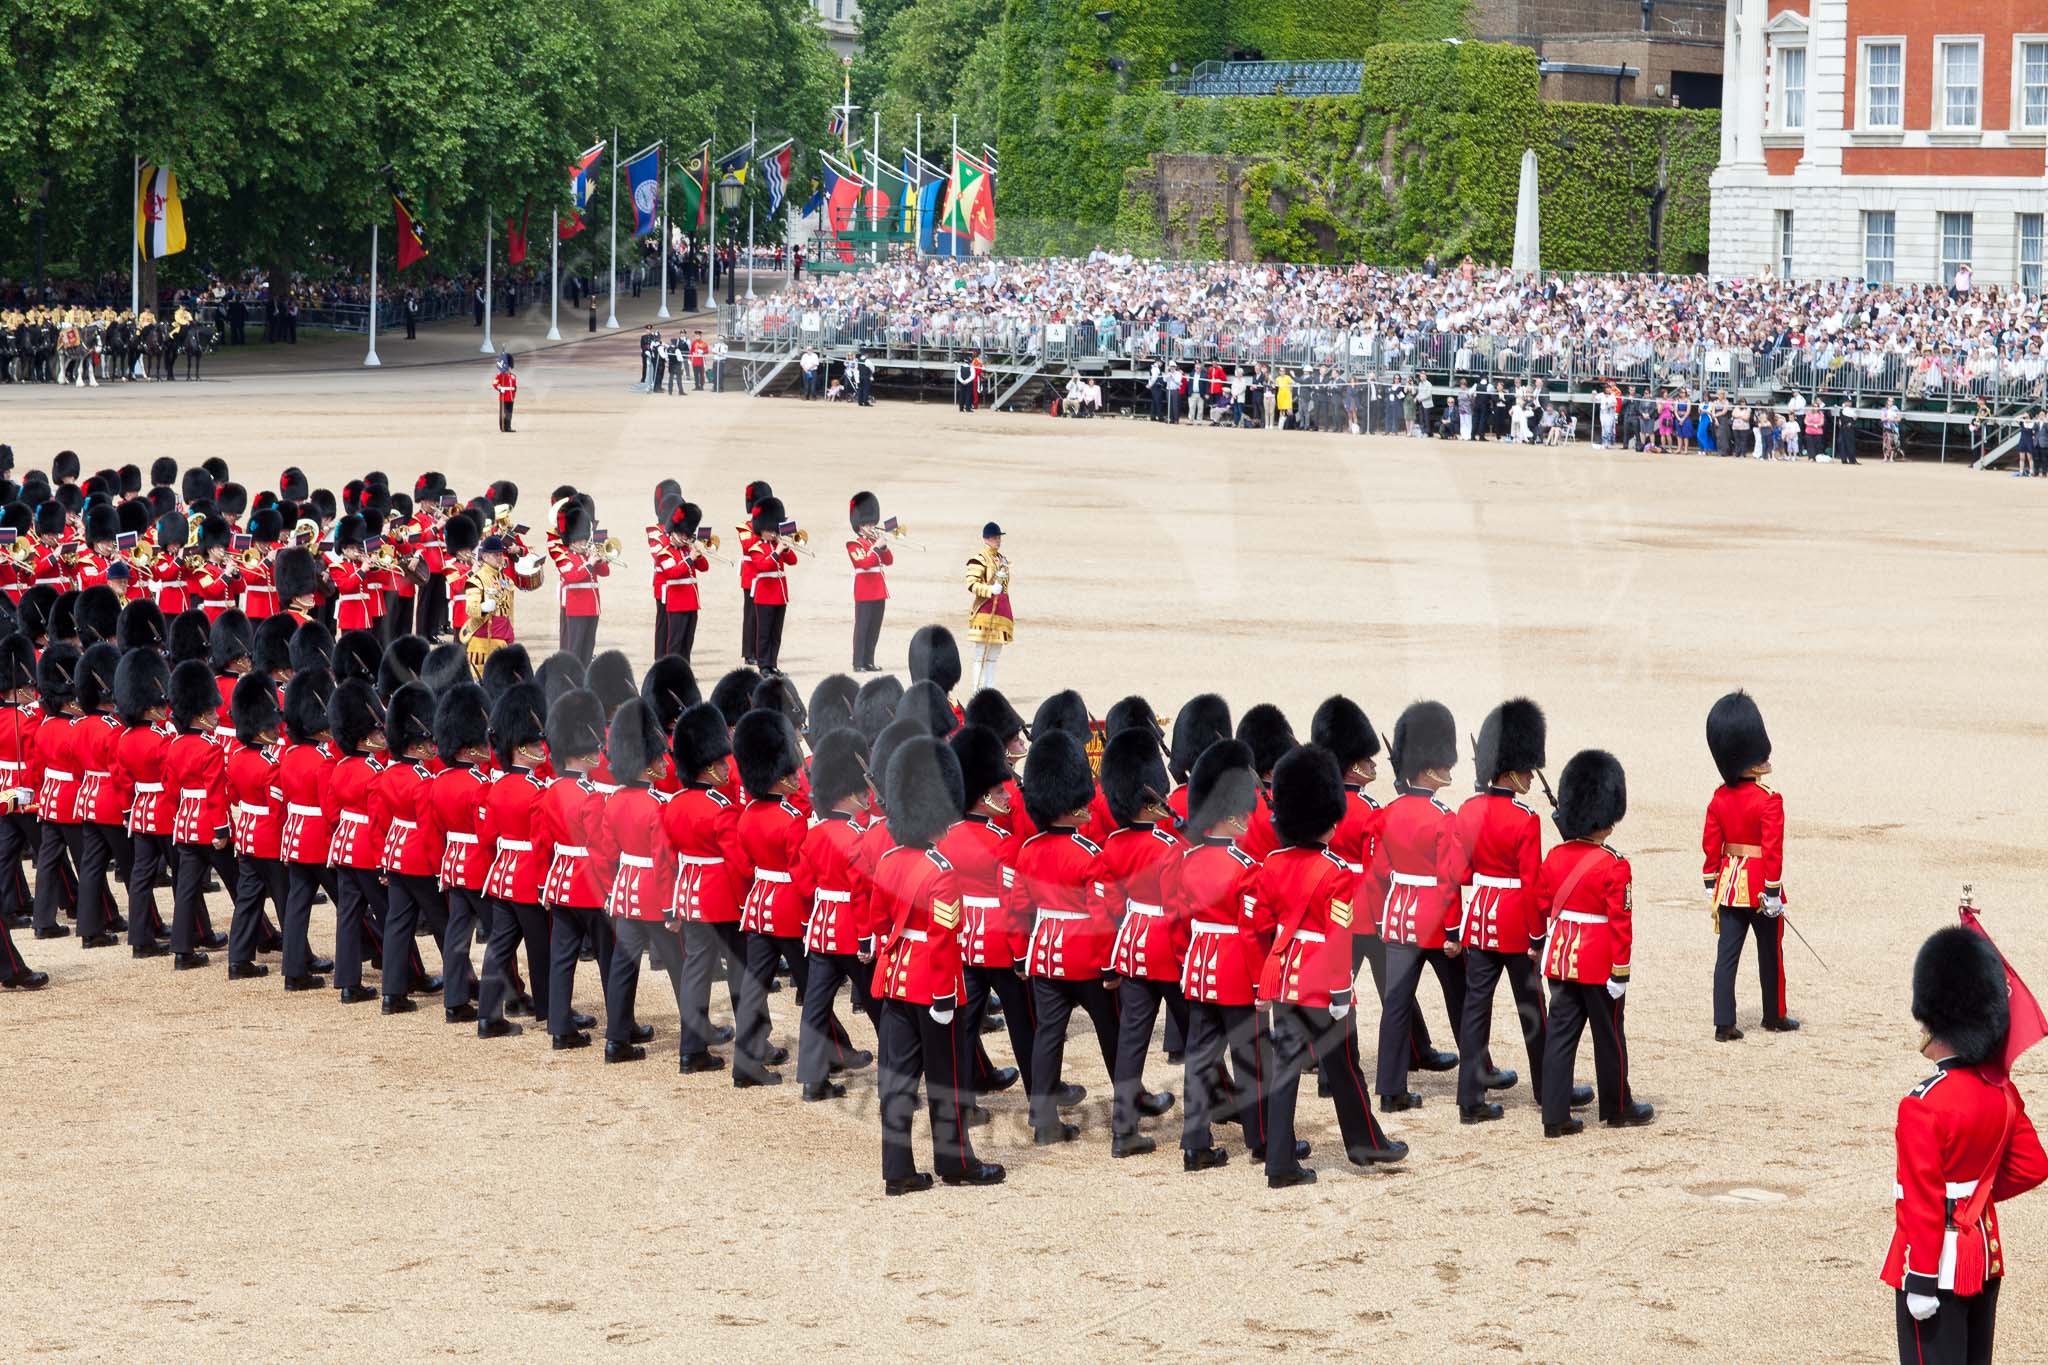 The Colonel's Review 2011: With the Massed Bands in the centre of Horse Guards Parade, the foot guards marching around them during the March Past..
Horse Guards Parade, Westminster,
London SW1,

United Kingdom,
on 04 June 2011 at 11:35, image #173